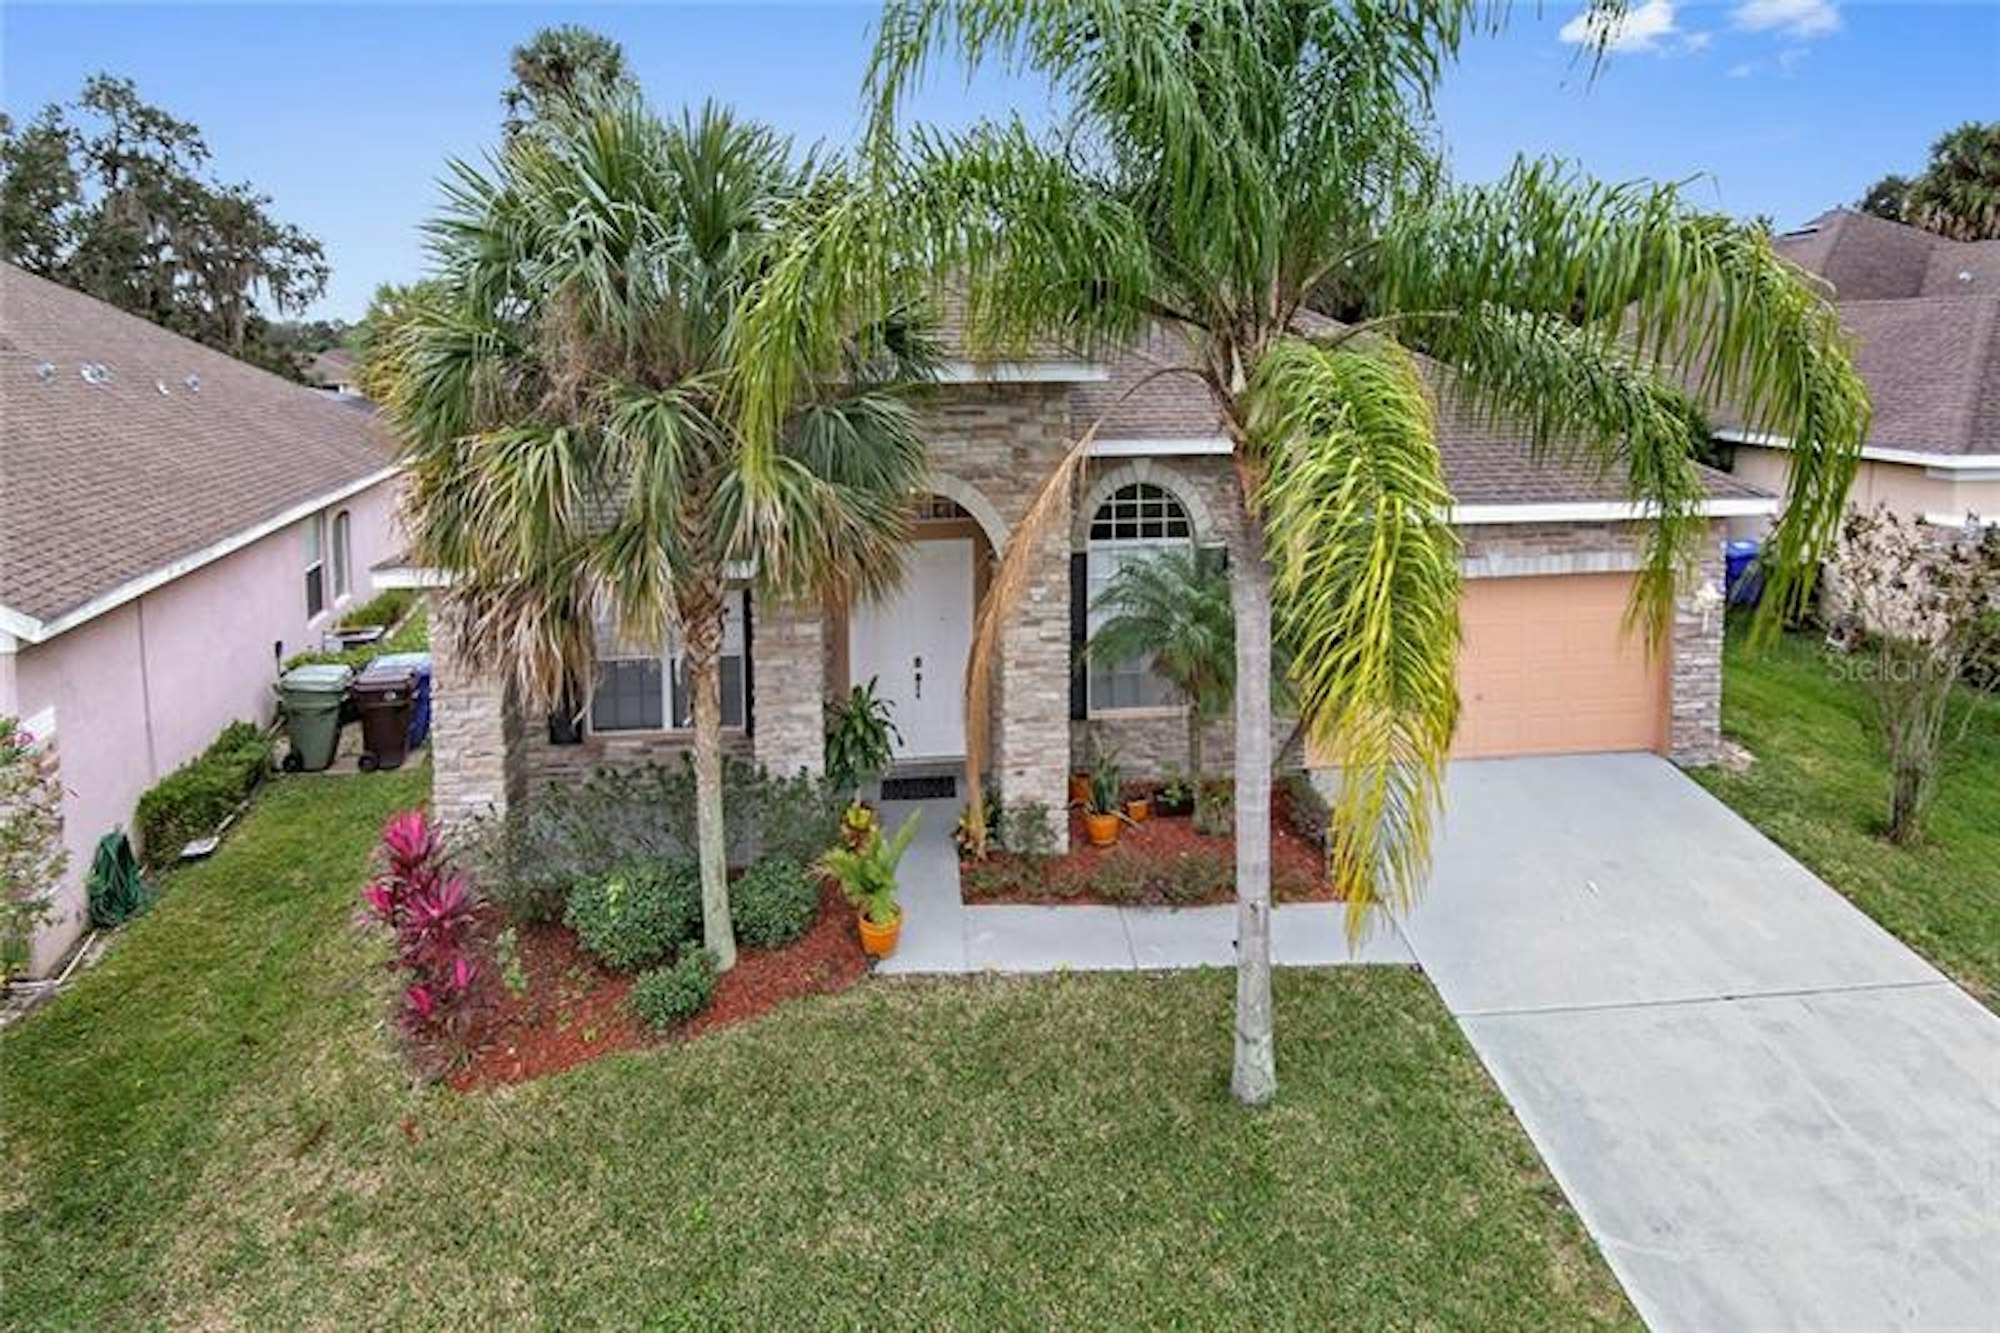 Photo 1 of 24 - 2014 Pitch Way, Kissimmee, FL 34746